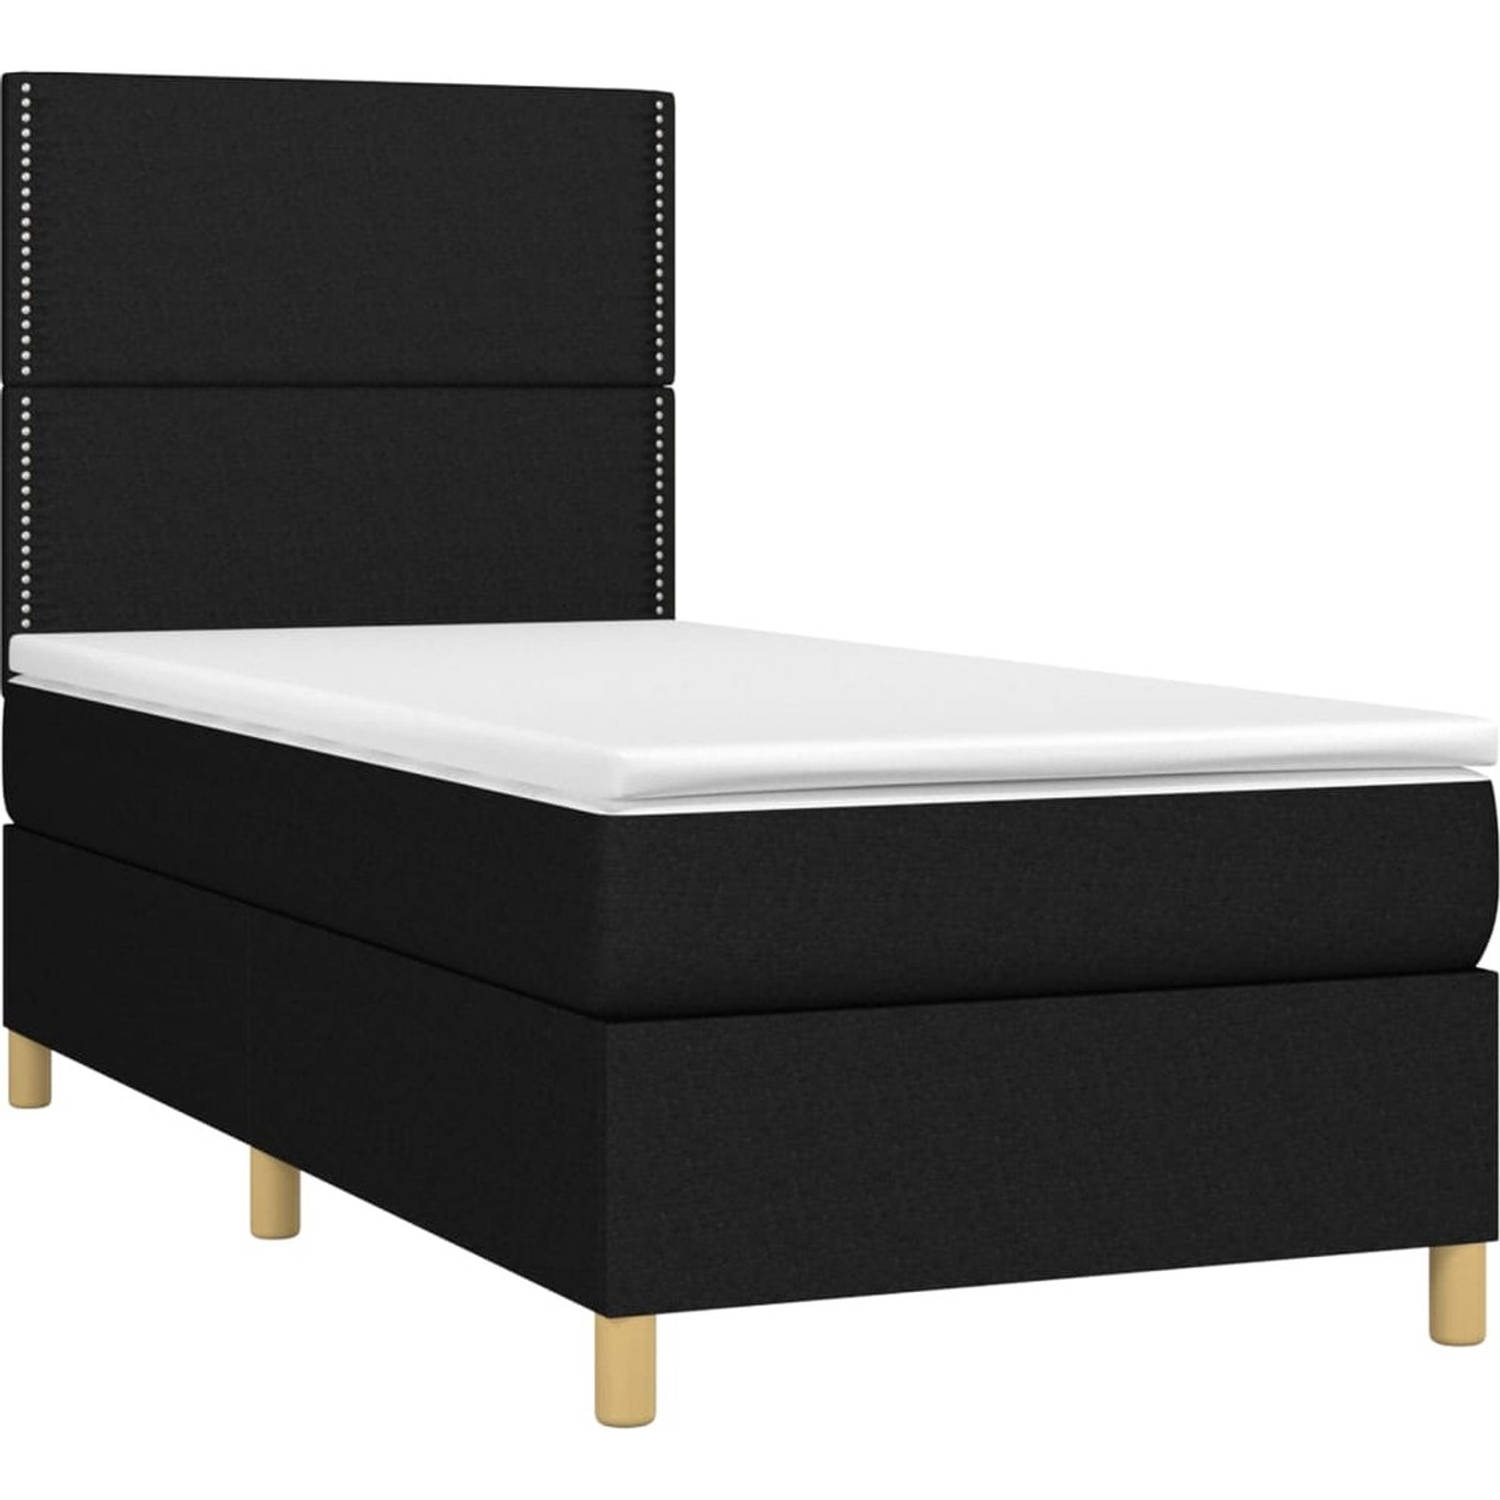 The Living Store Boxspringbed - naam - Bed - 203 x 90 x 118/128 cm - Zwart